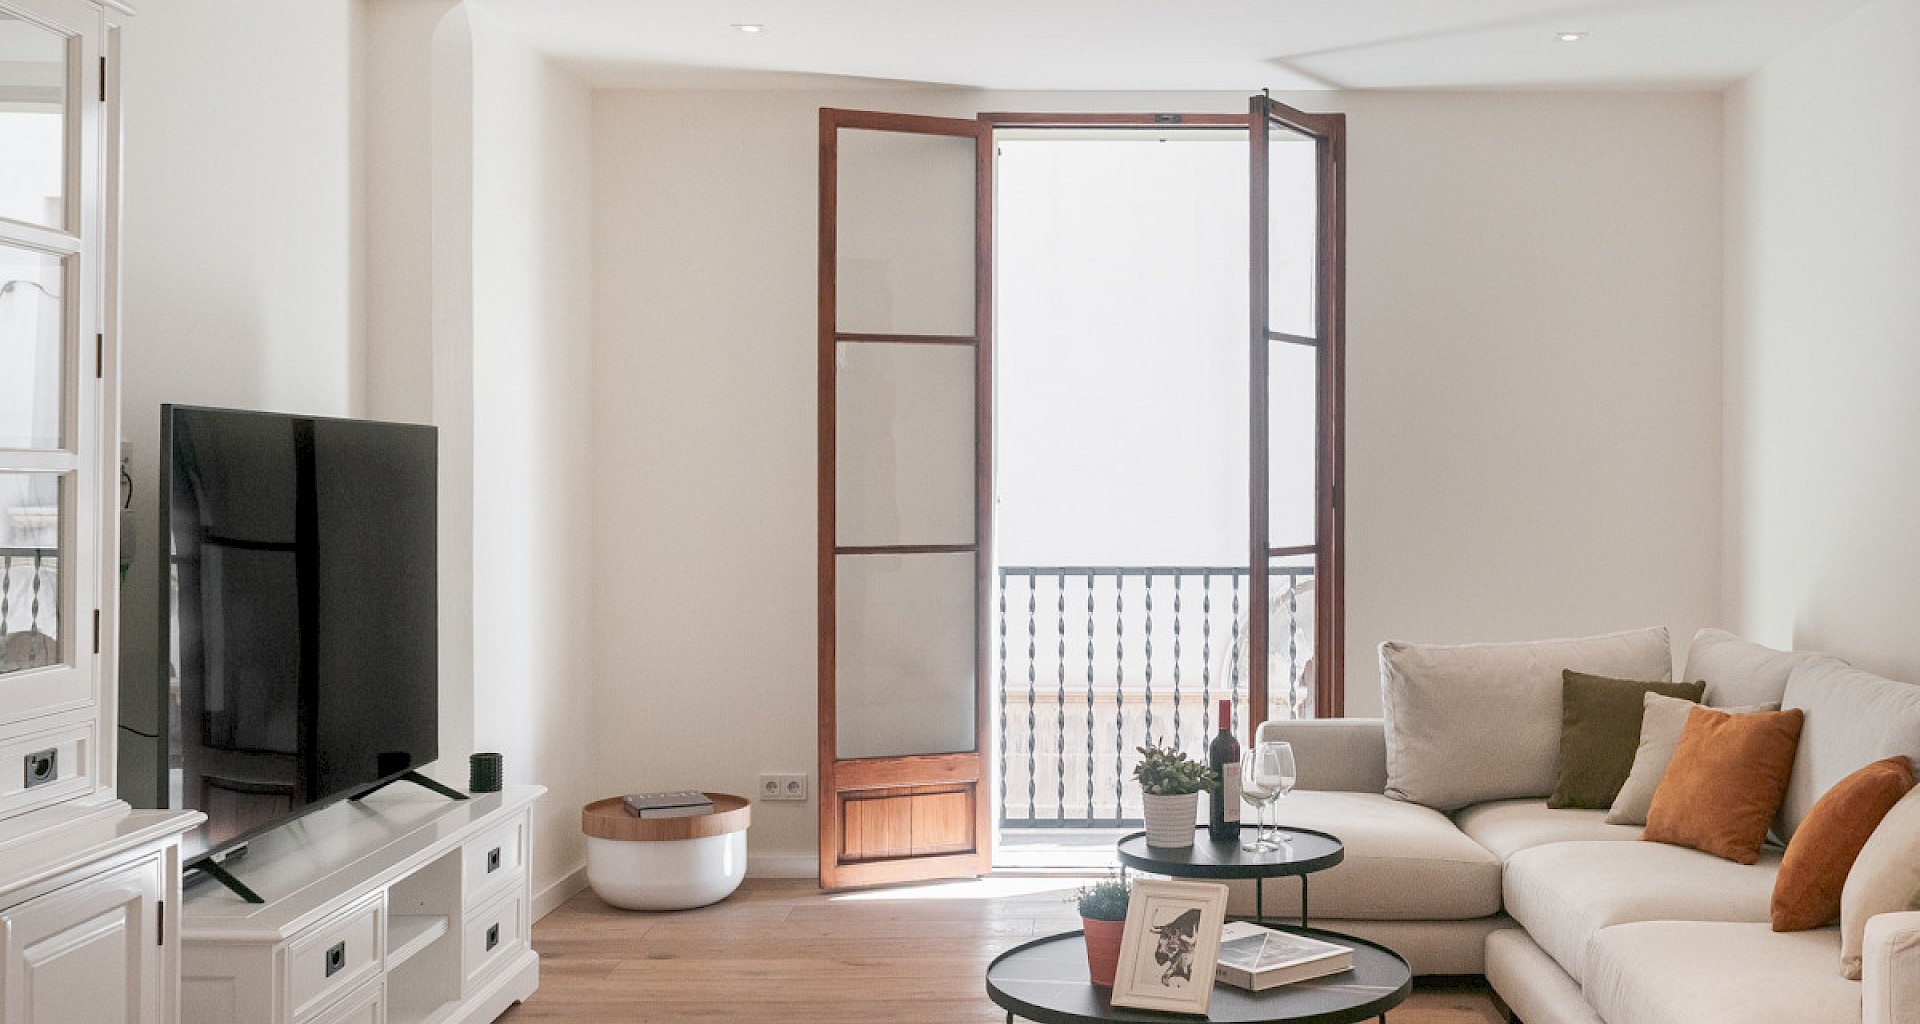 KROHN & LUEDEMANN Modern renovated apartment in Palma old town for sale Wohnung in Palma Altstadt 24